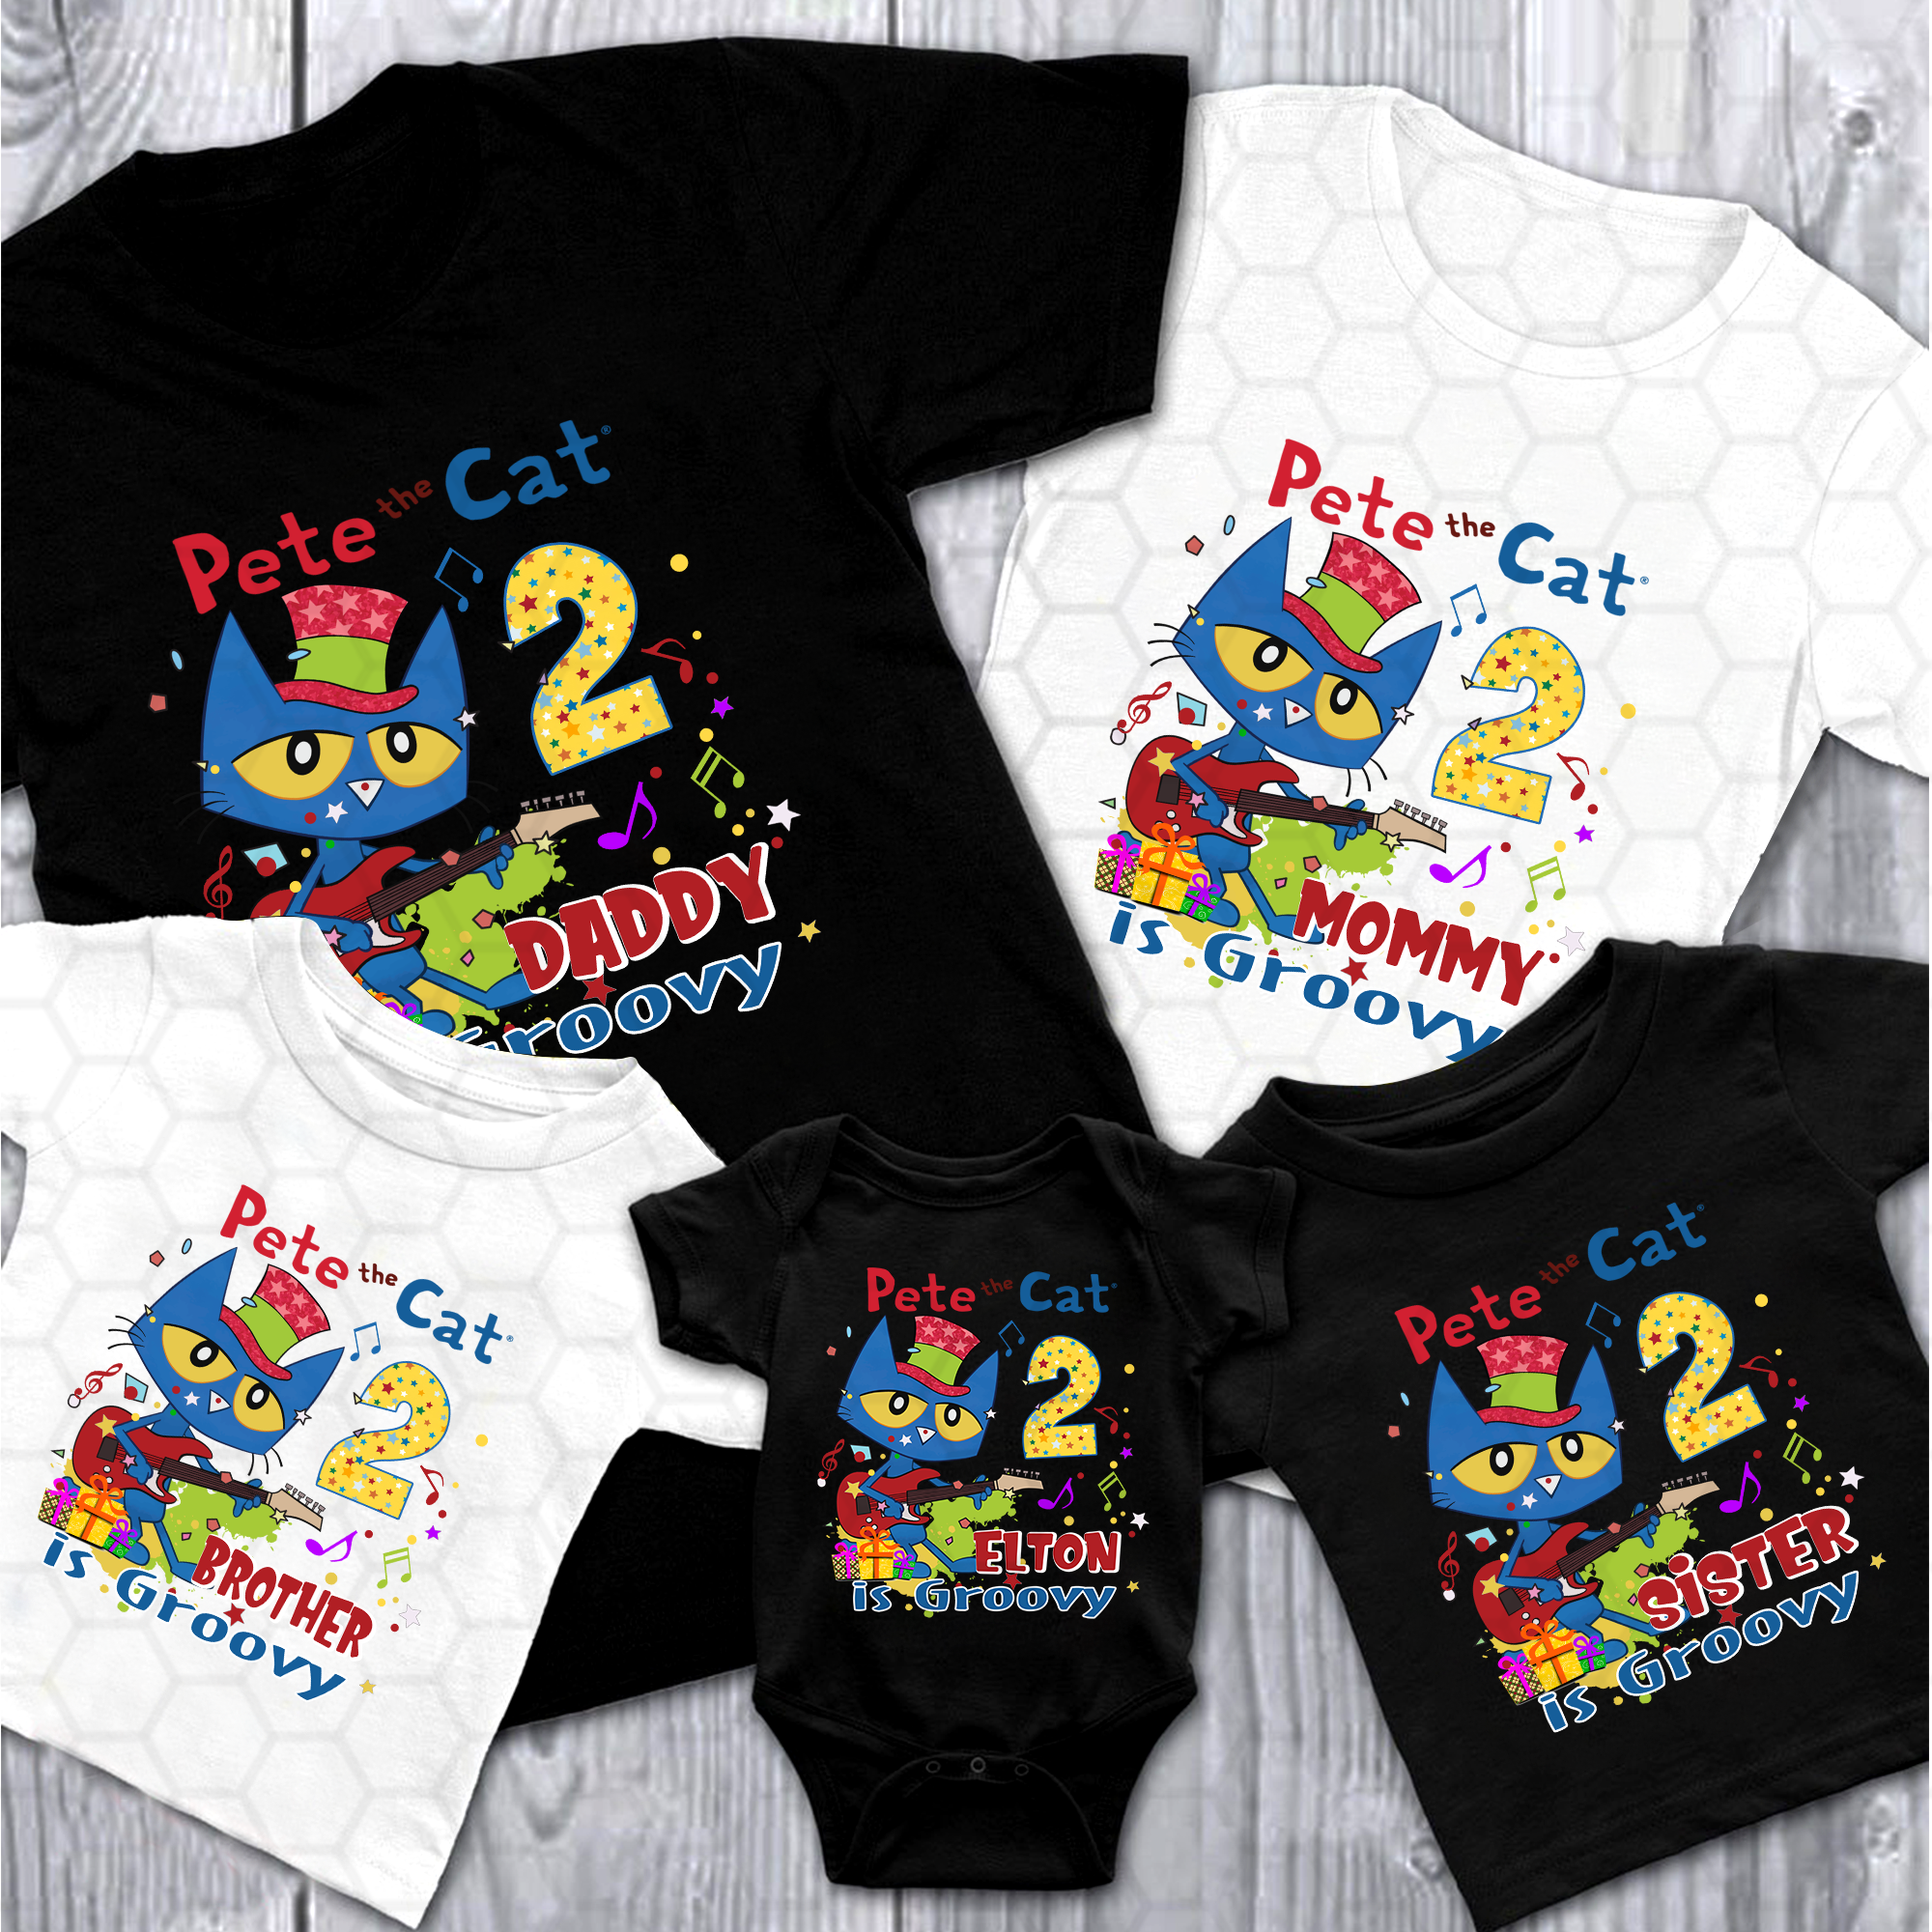 Pete The Cat Birthday Shirt, Pete The Cat Shirt, Pete The Cat Family Shirt, Pete The Cat Theme Party, Custom Name And Age